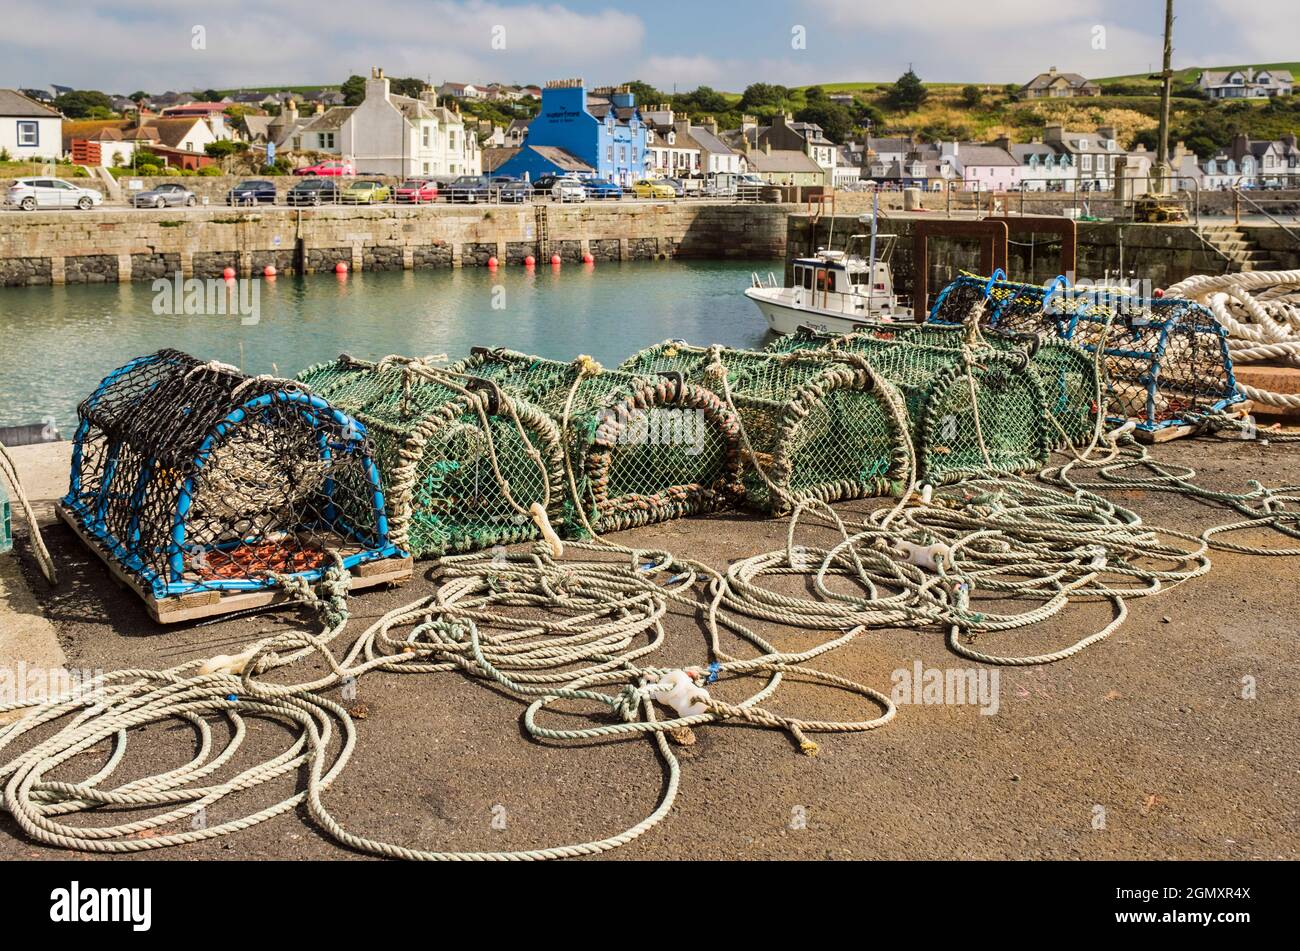 Lobster creels on quay of harbour in small picturesque west coast fishing village.  Portpatrick, Dumfries and Galloway, Scotland, UK, Britain Stock Photo